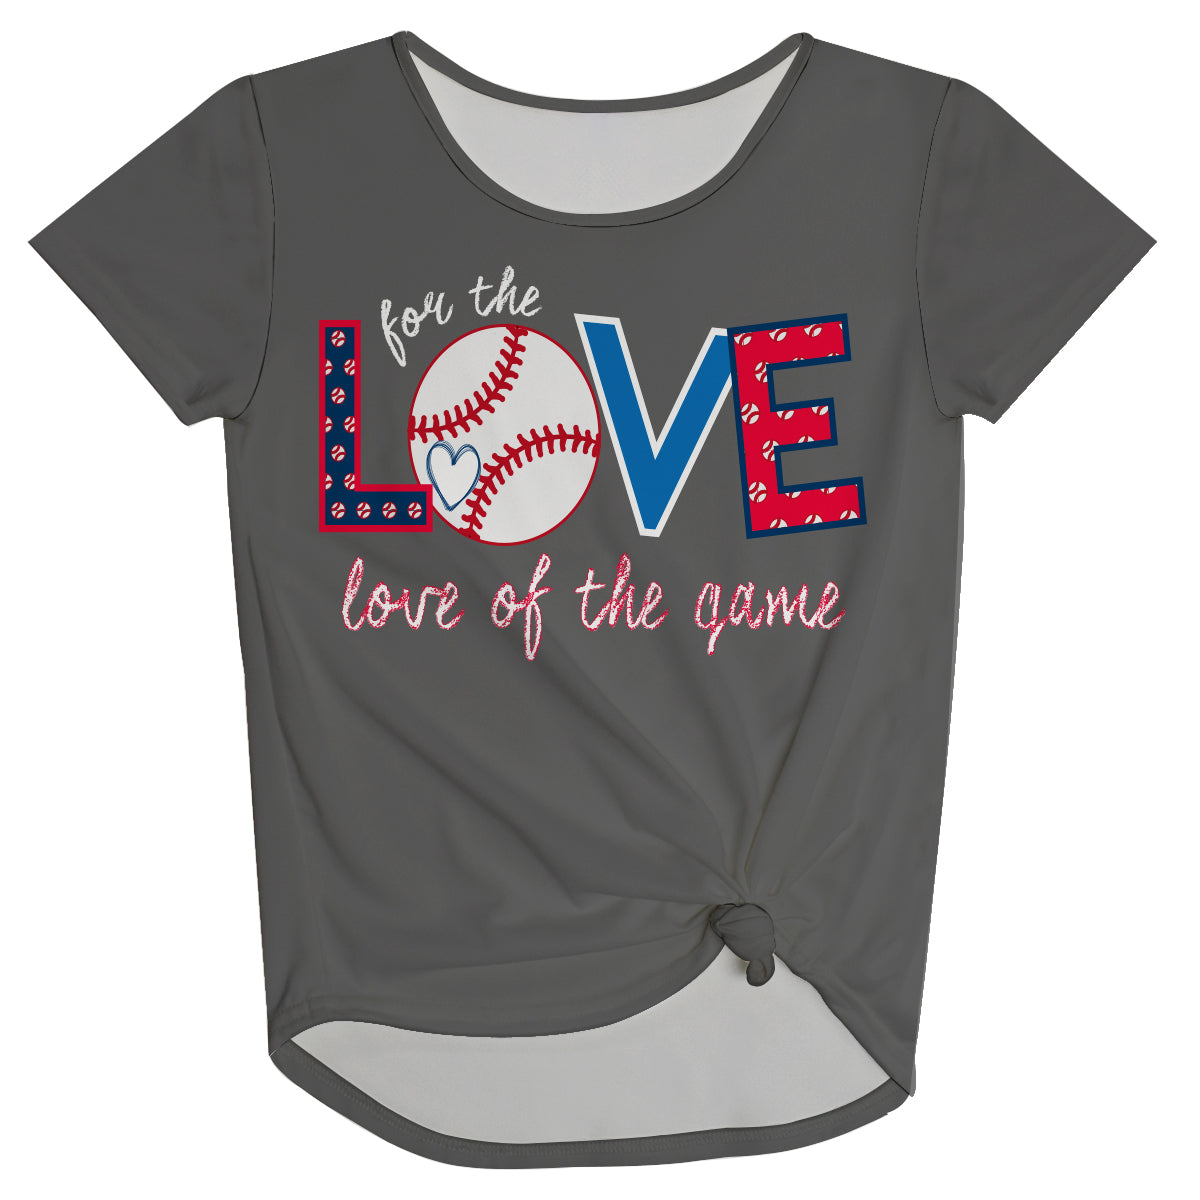 Love Of the Game Gray Knot Top